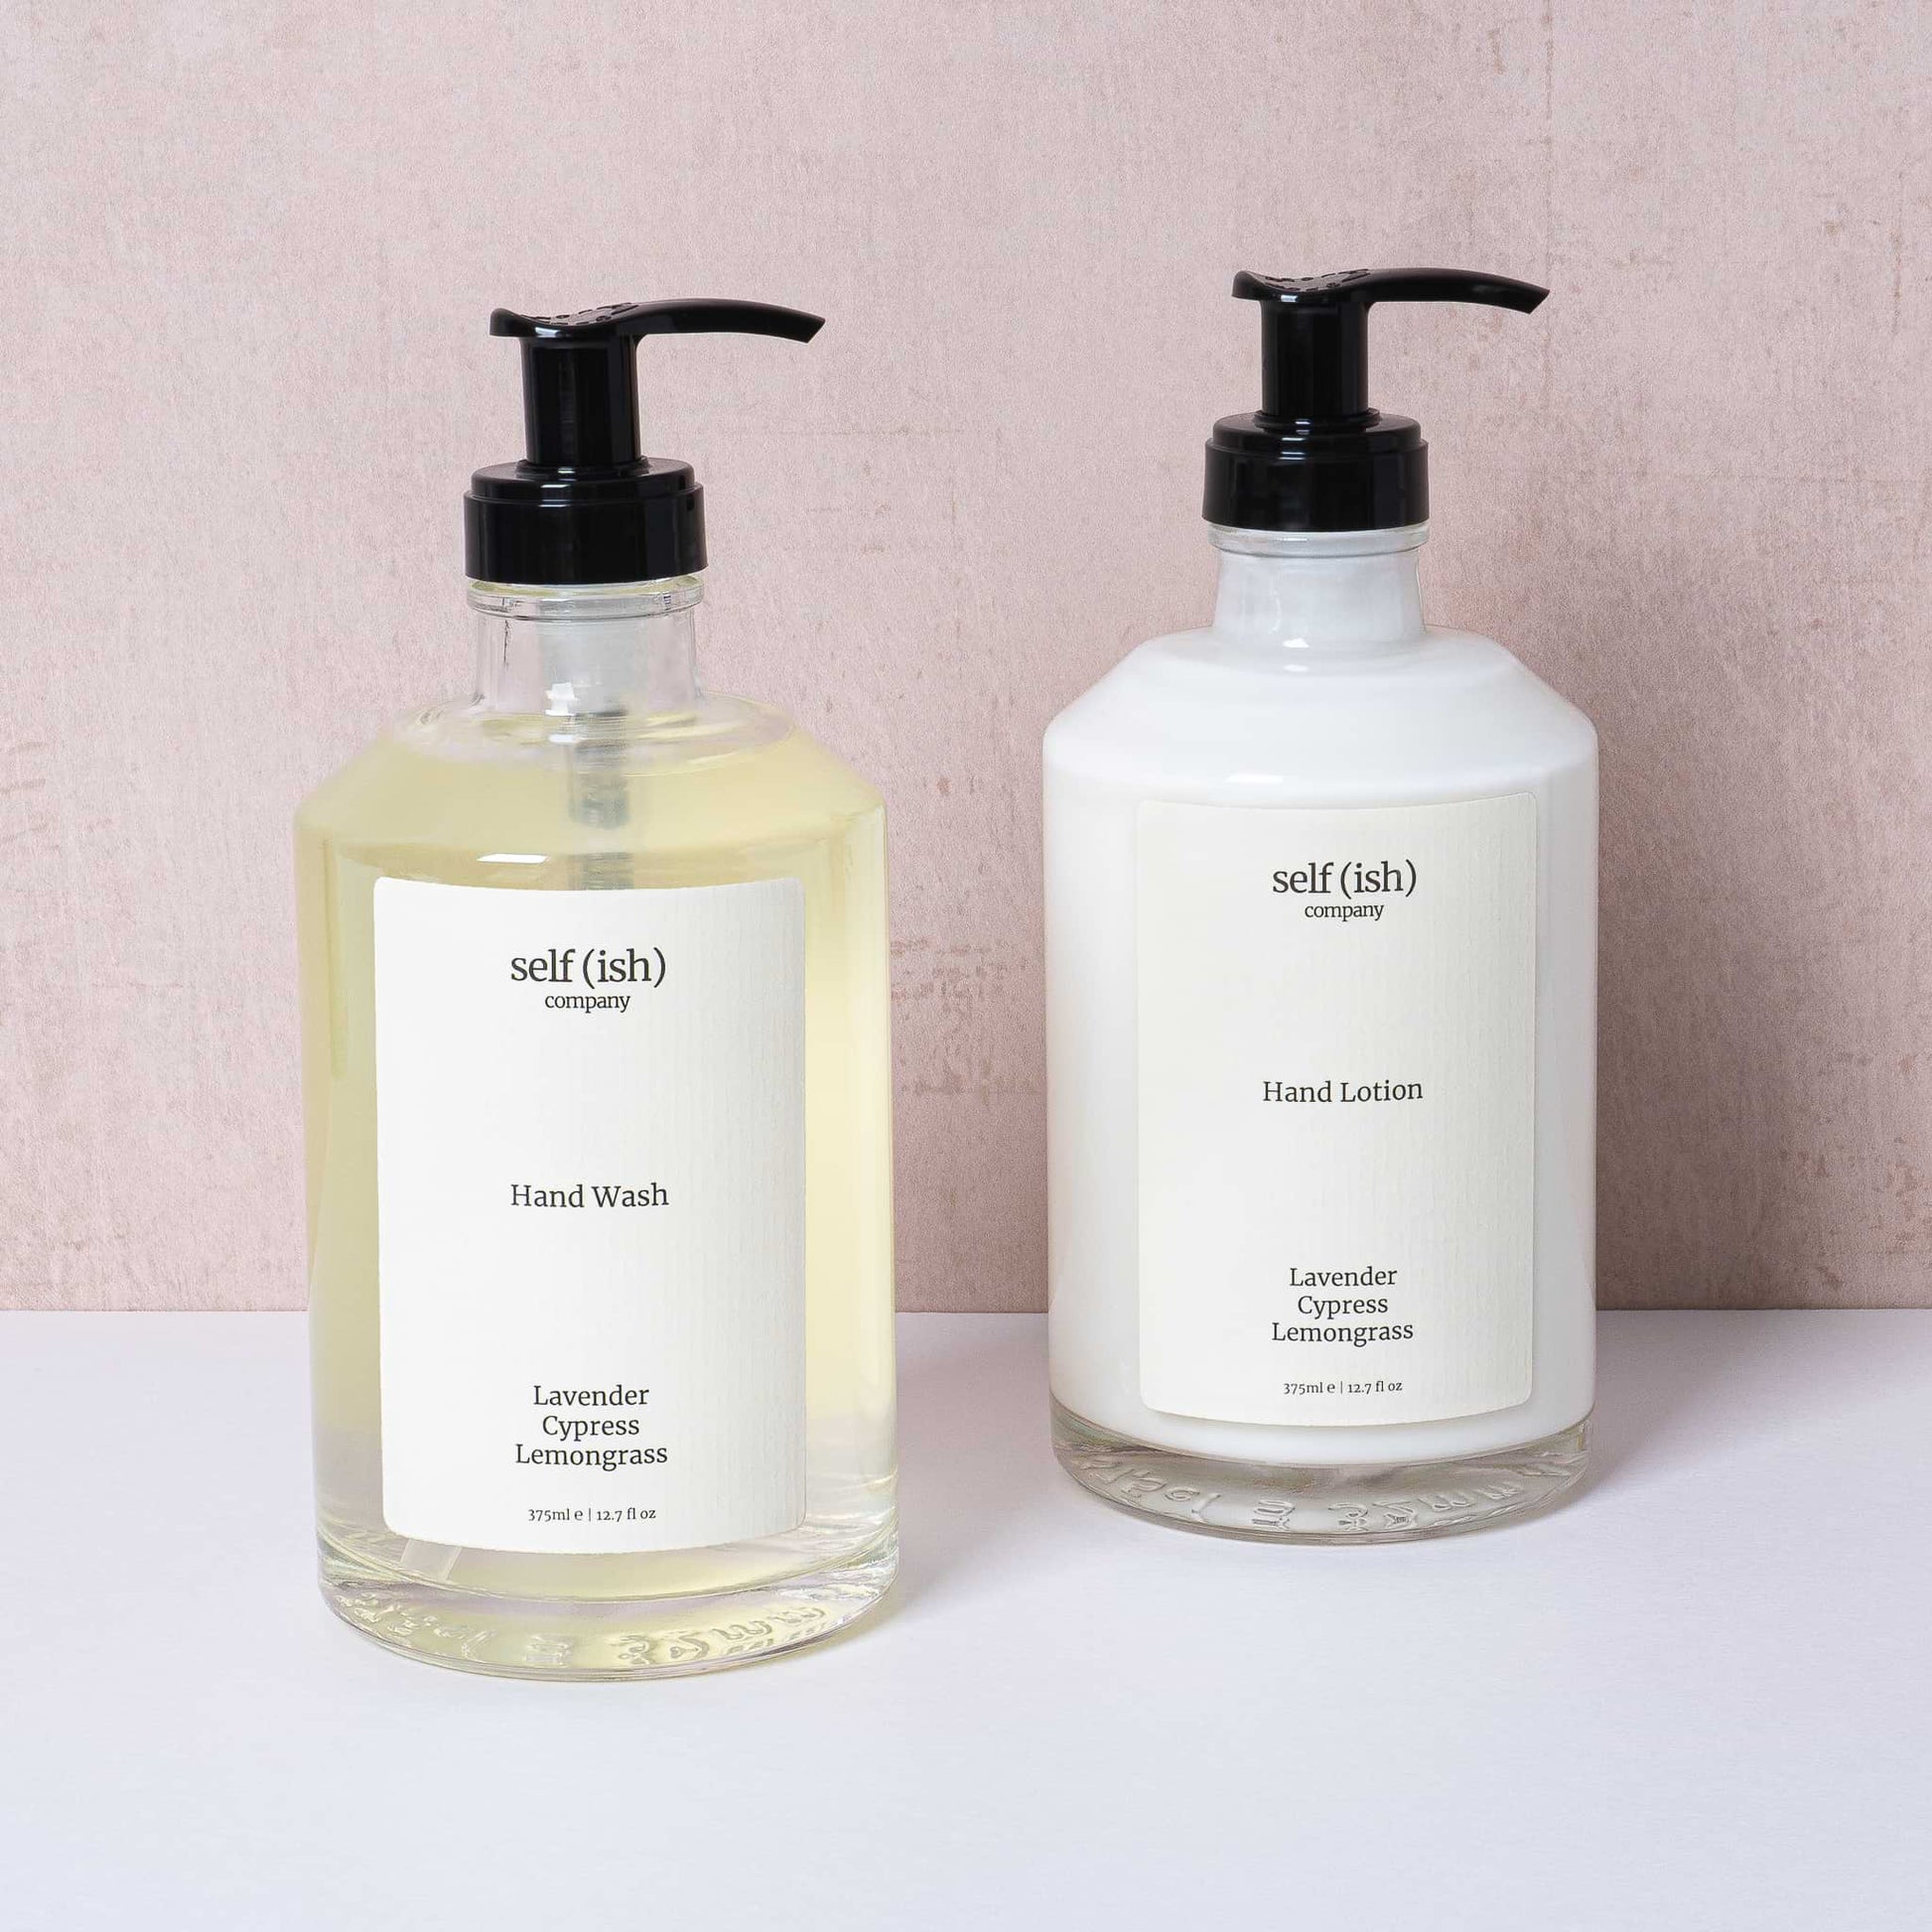 liquid hand soap and hand lotion with essential oil fragrances of lavender, cypress and lemongrass. Luxury glass bottle and pump dispenser